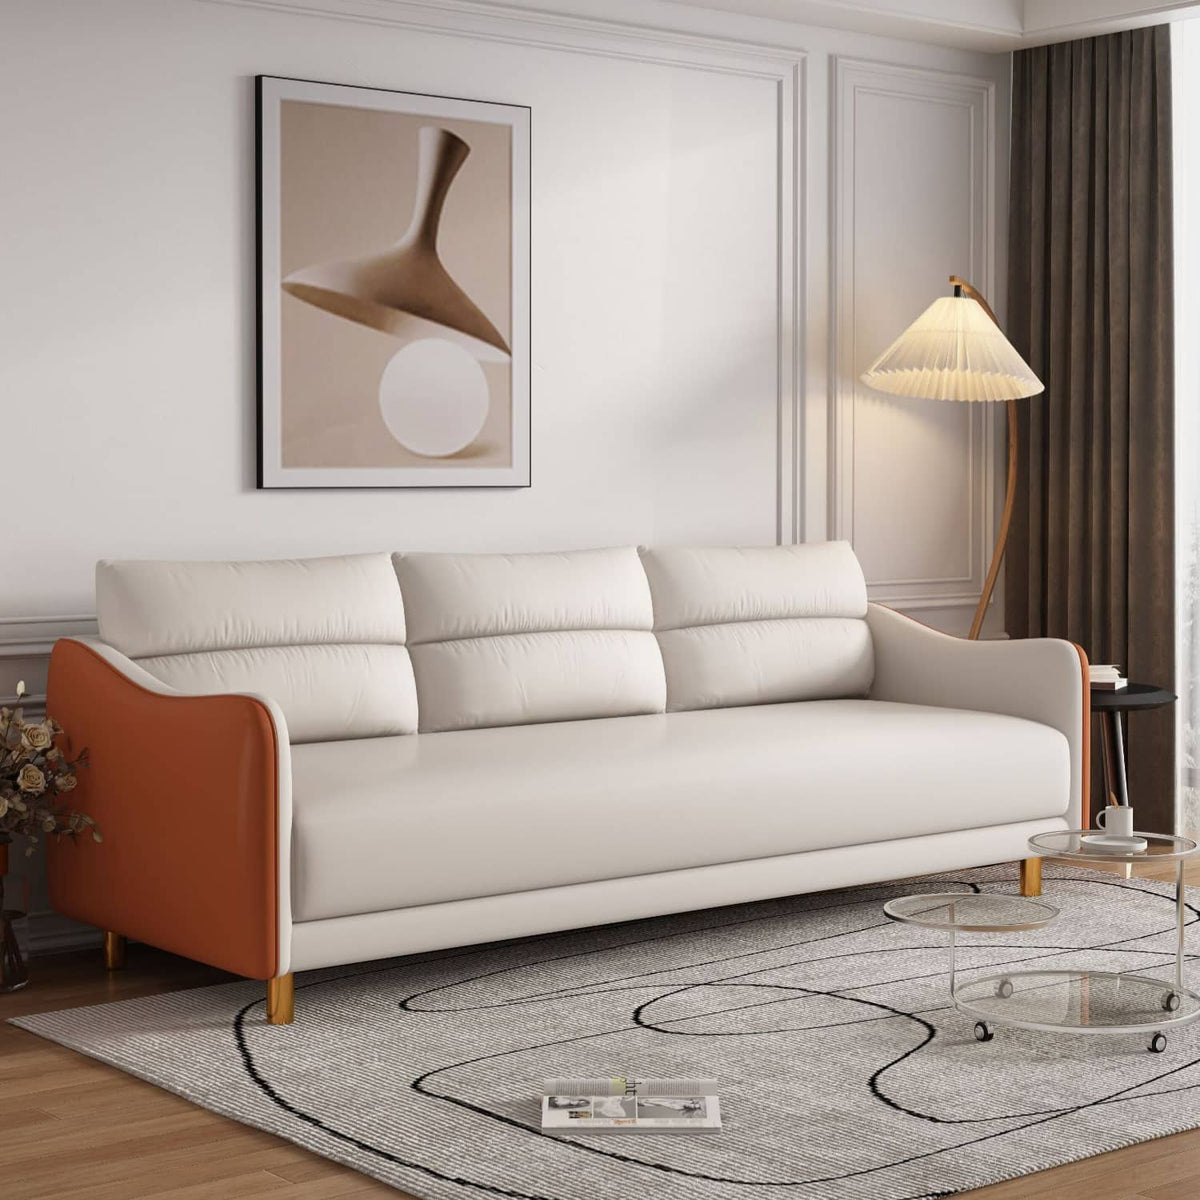 Stylish Techno Fabric Sofa - Available in Orange, Off White, Khaki, Black, Light Gray, and Dark Blue with Wood Accents qm-16